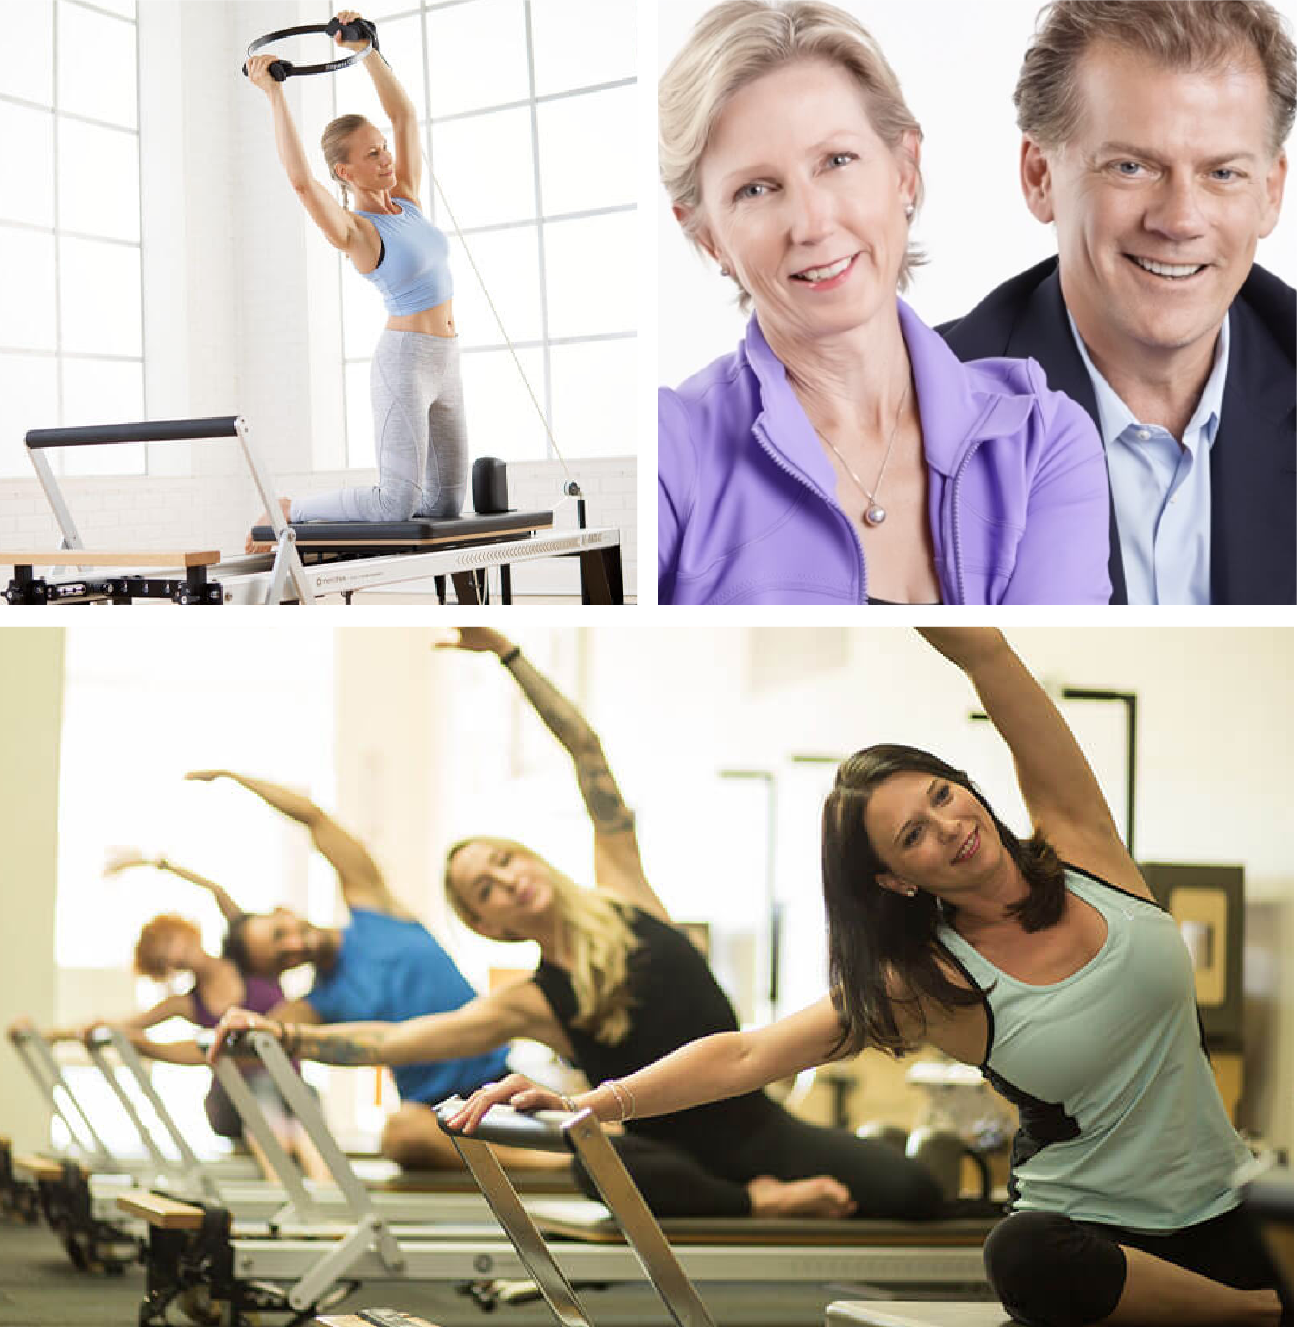 Merrithew — Leisure Concepts Australia - Pilates, Strength and Cardio from  the world's leading brands